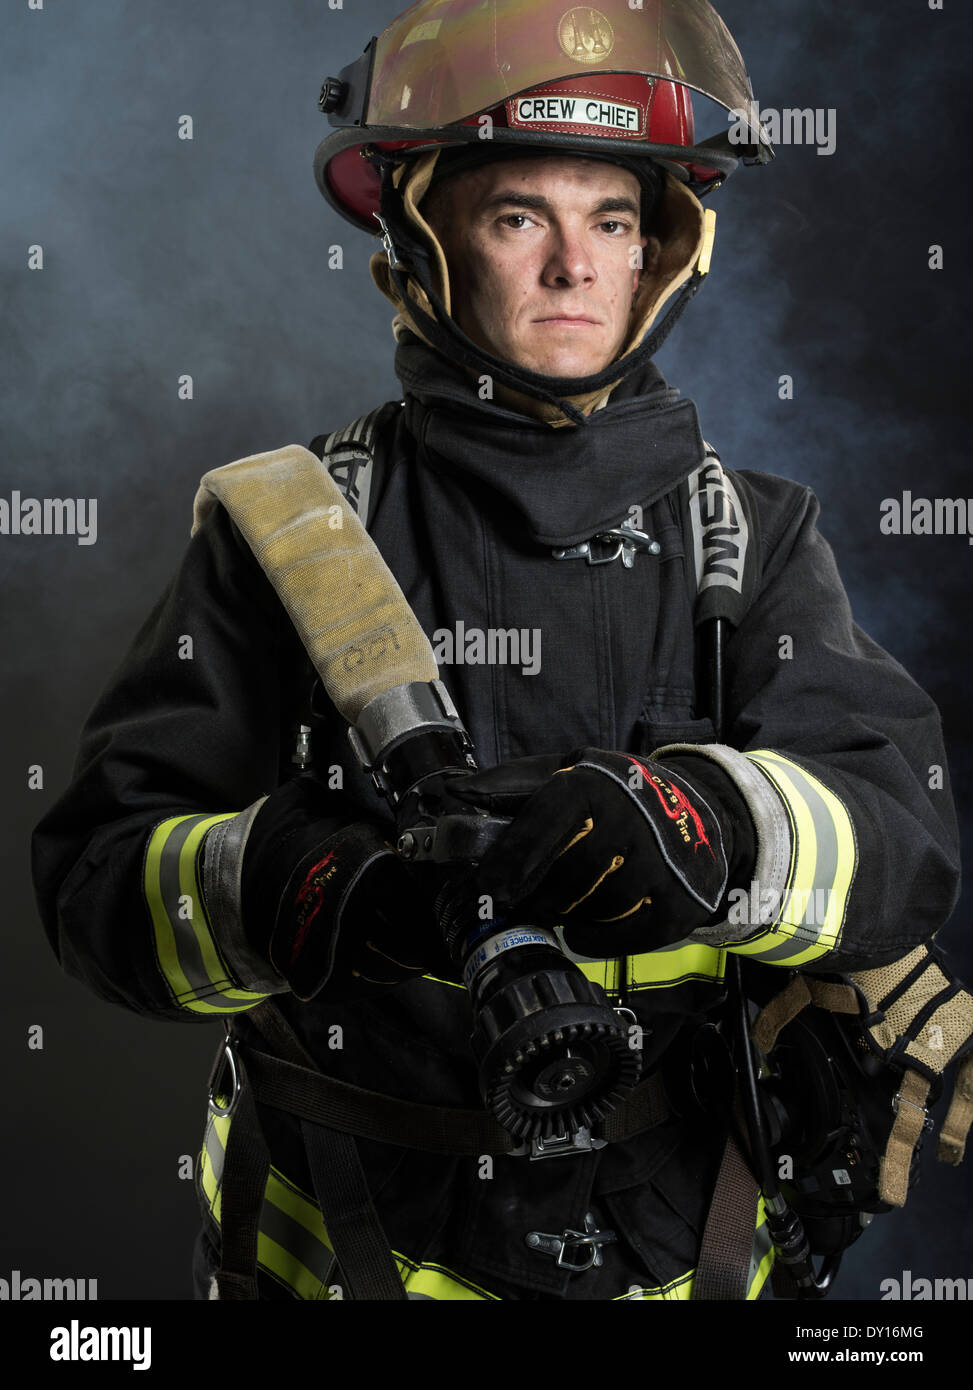 Male firefighter in structural firefighting uniform with breathing apparatus and axe Stock Photo